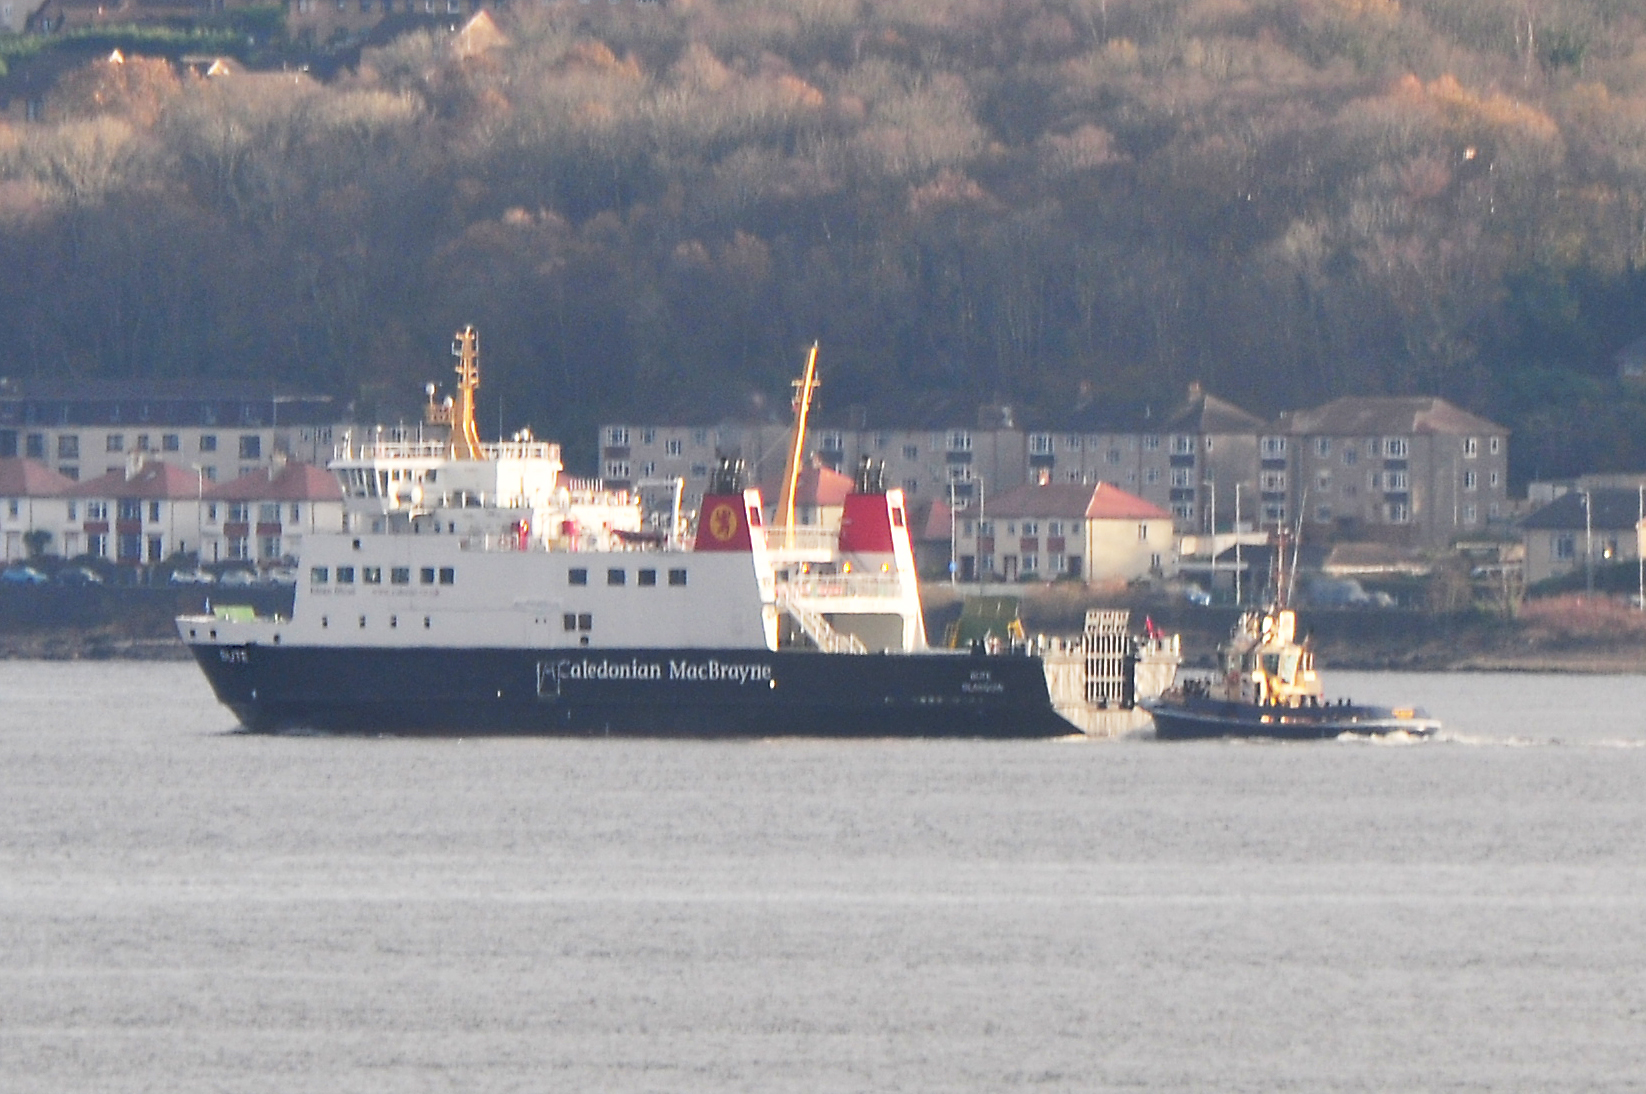 Bute CalMac disruption for up to ten days